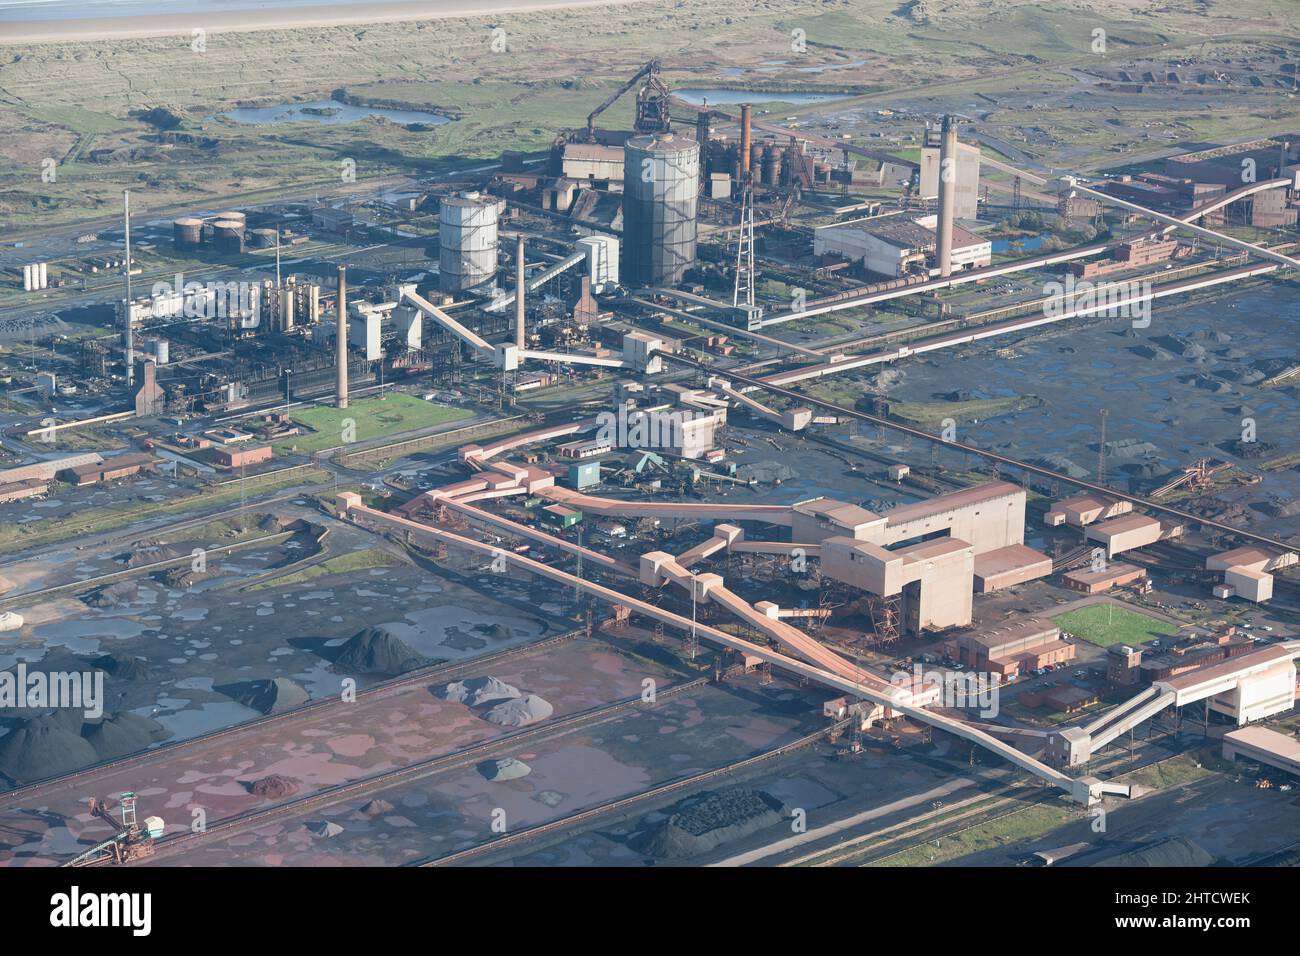 Teesside Steel Works, Redcar and Cleveland, 2015. Stock Photo